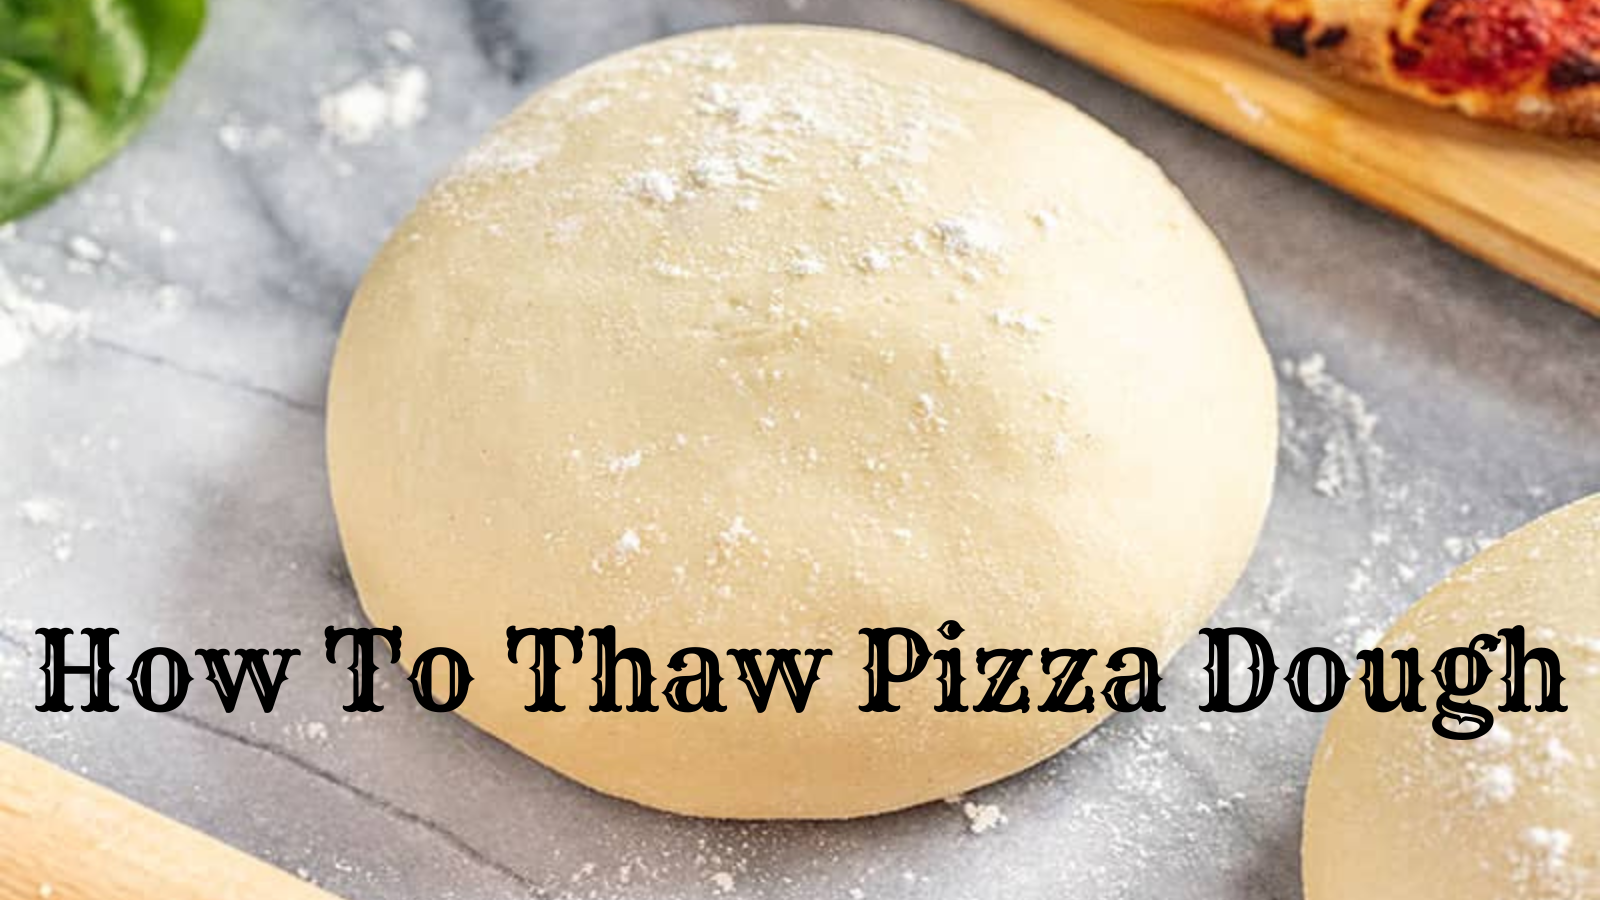 How To Thaw Pizza Dough: Step-By-Step Instructions In 3 Ways